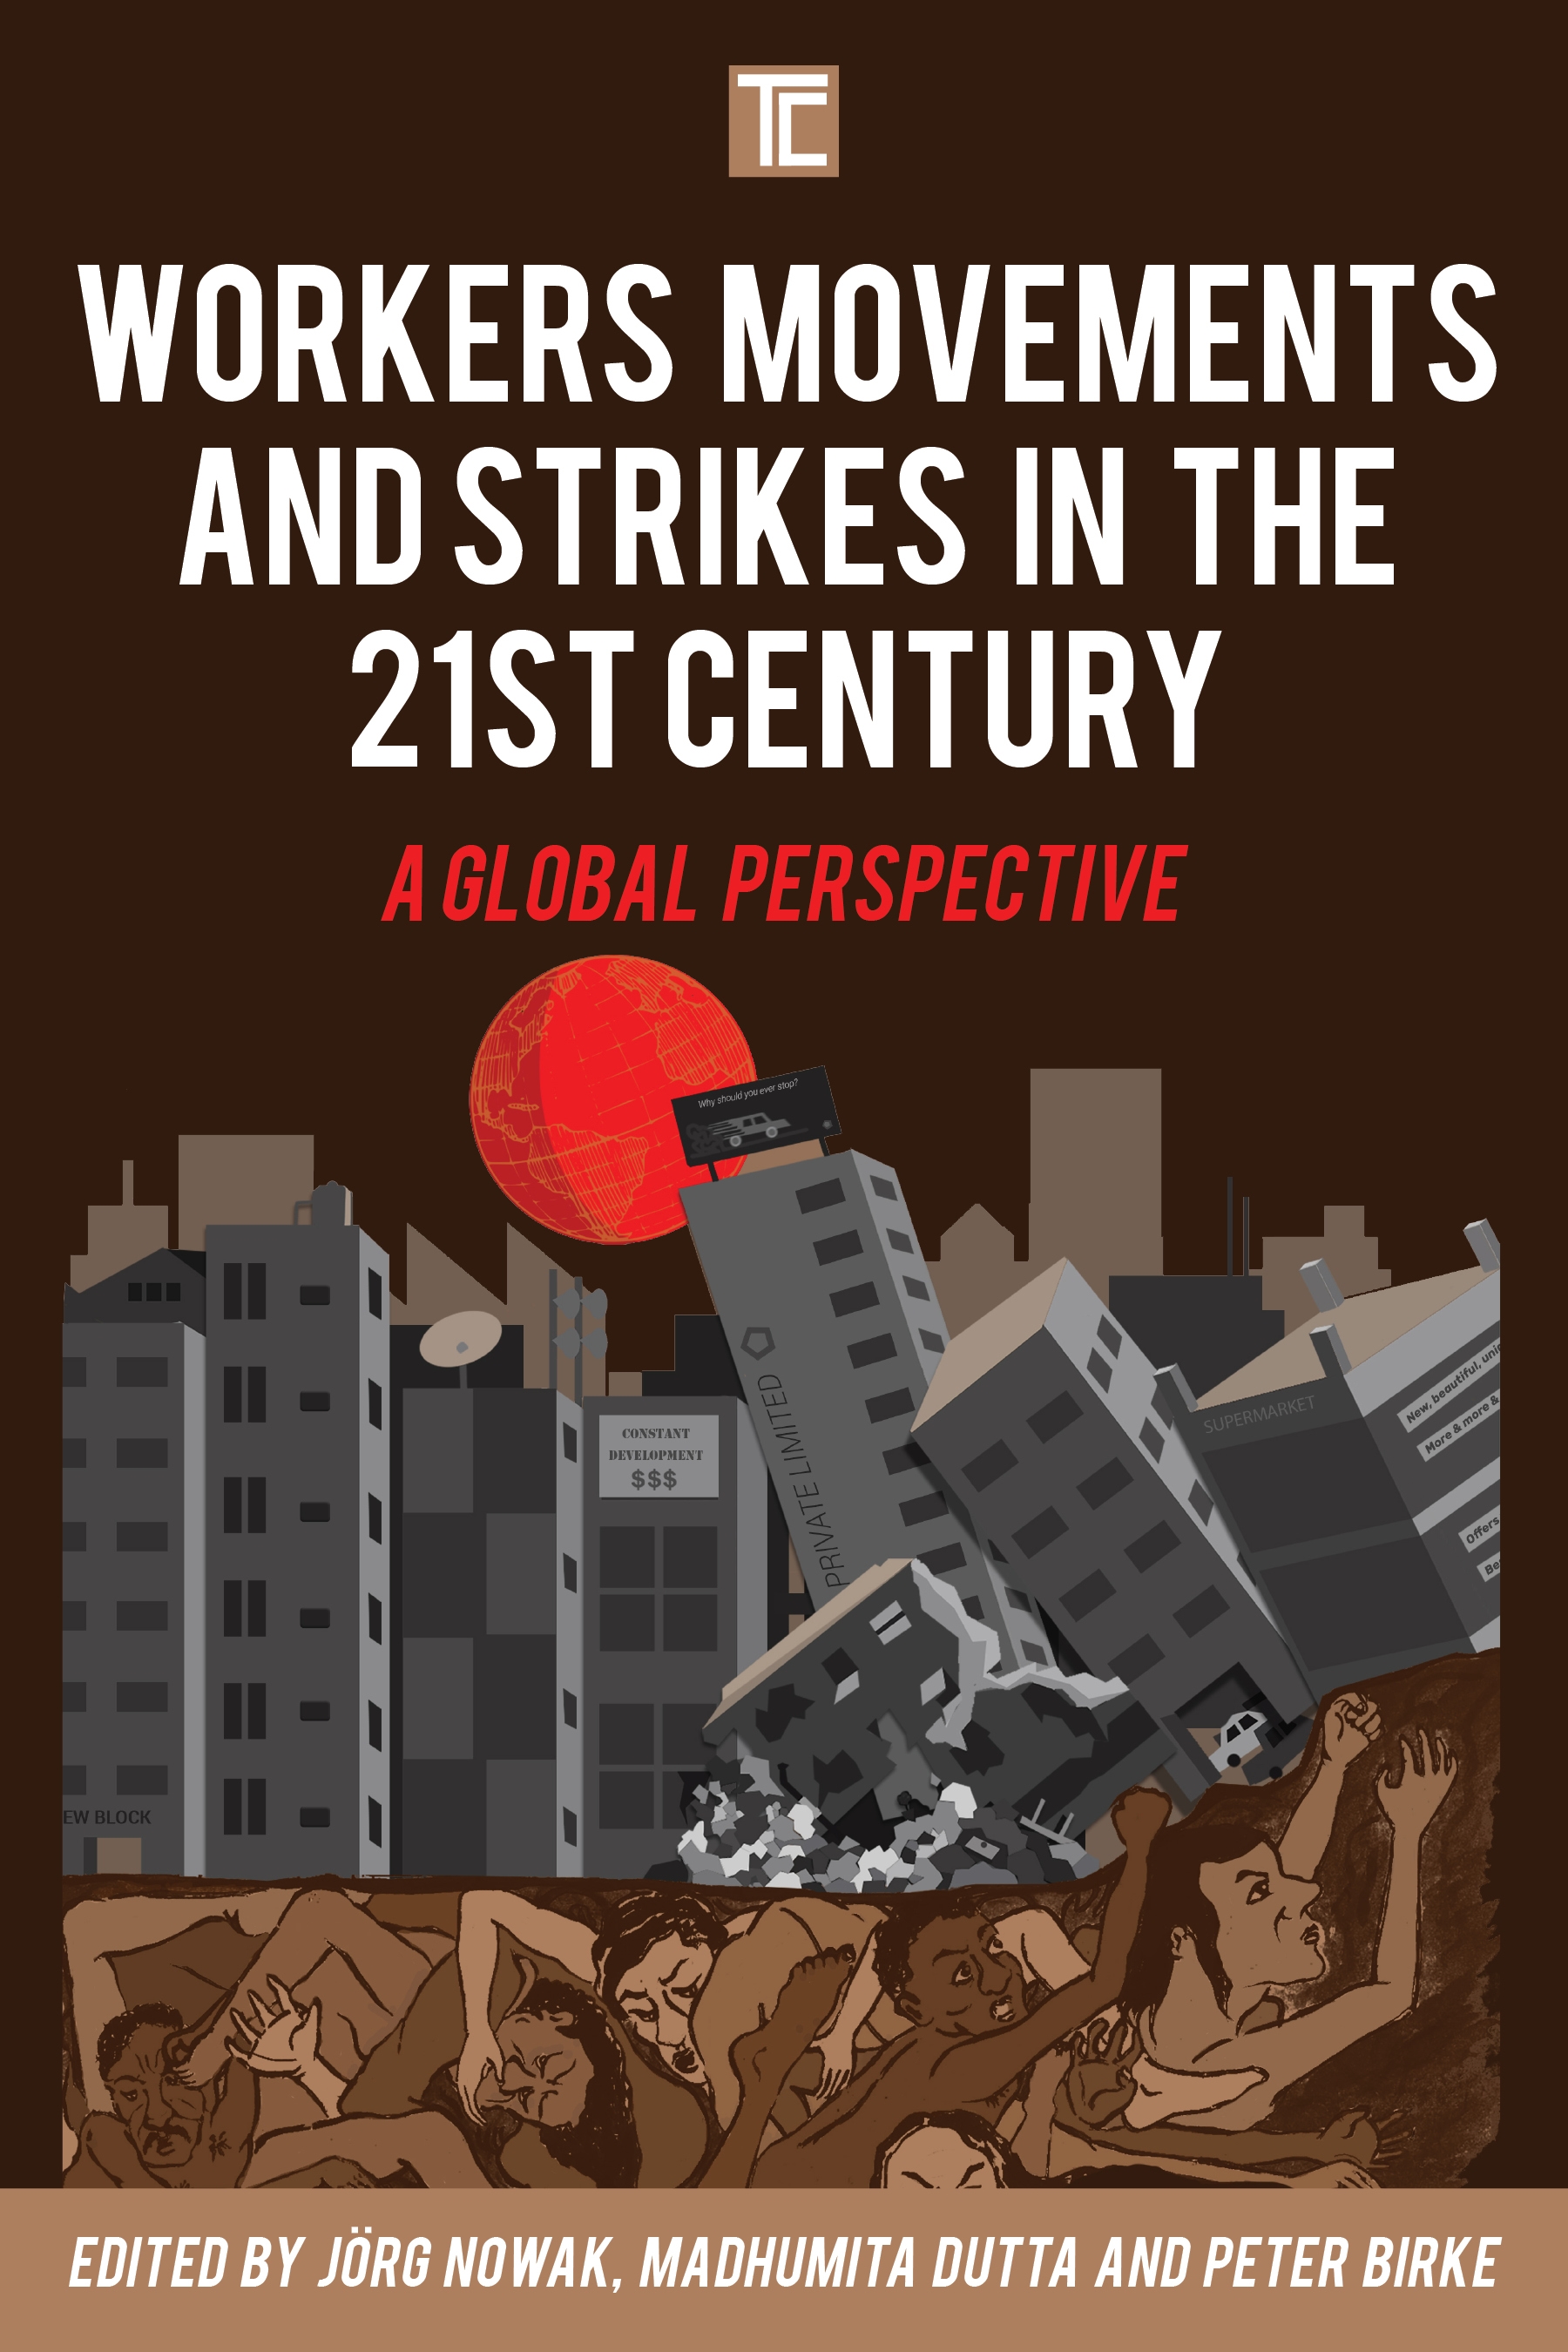 Twenty first century. Movements of workers.